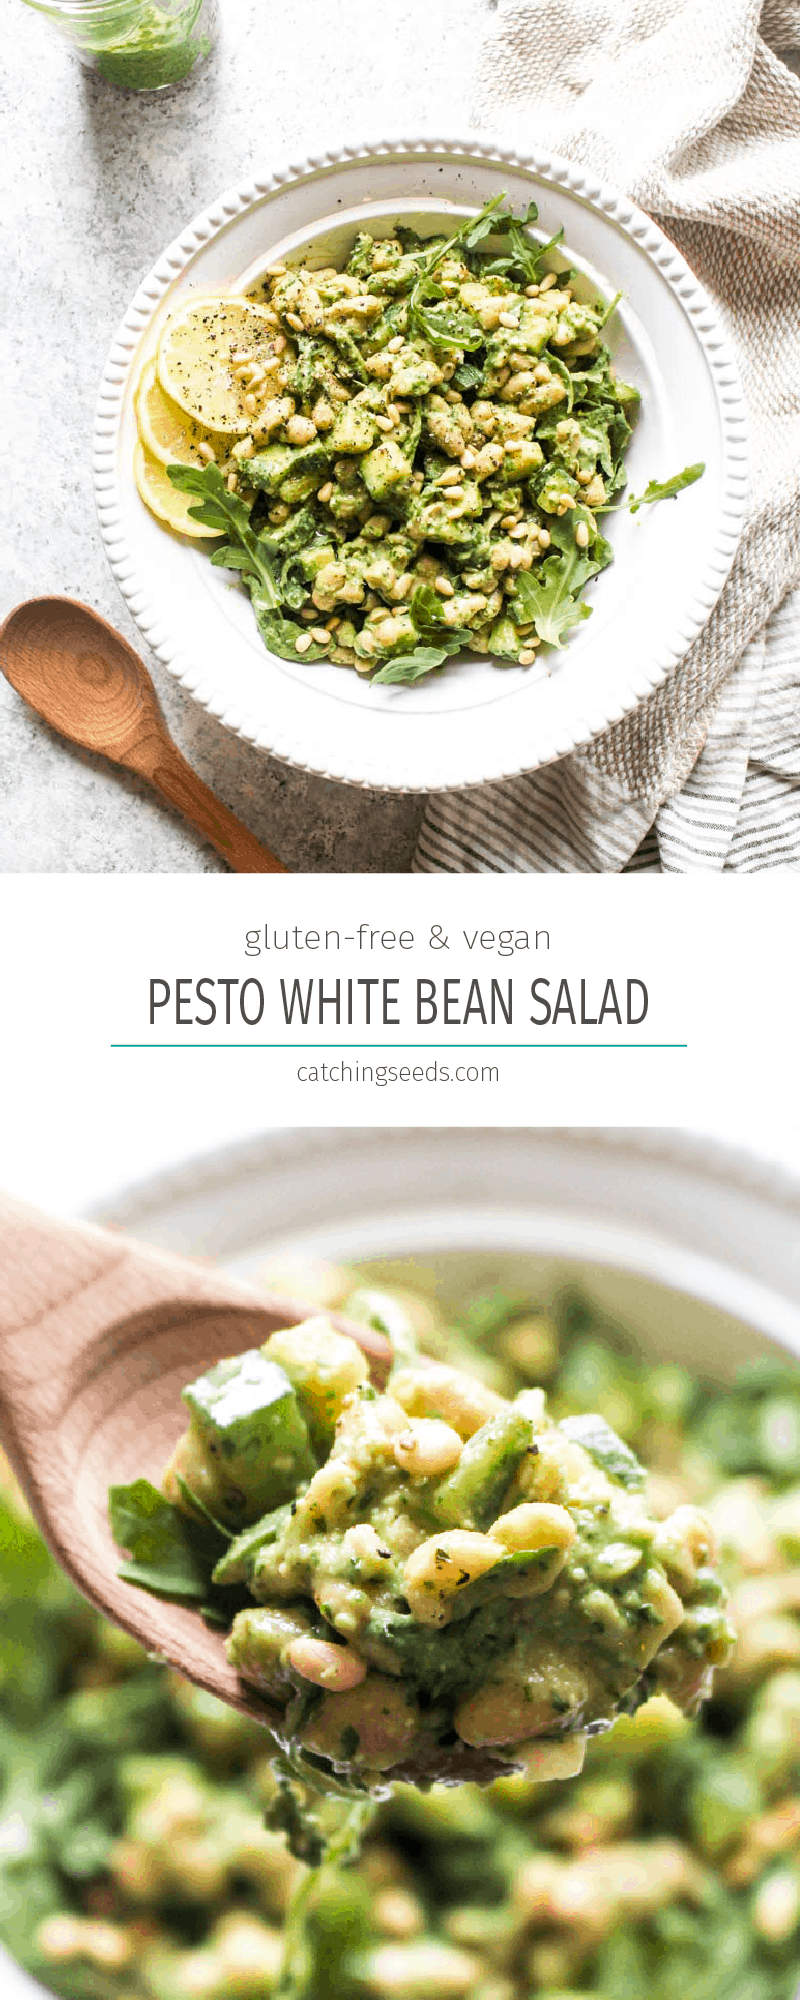 This no-cook summer Pesto White Bean Salad is bursting with bright basil pesto, crunchy cucumbers, creamy beans, and peppery arugula. Perfect for hot summer nights, this gluten free and vegan dish gets even more flavorful as it sits, making it the perfect healthy picnic and potluck dish. | CatchingSeeds.com